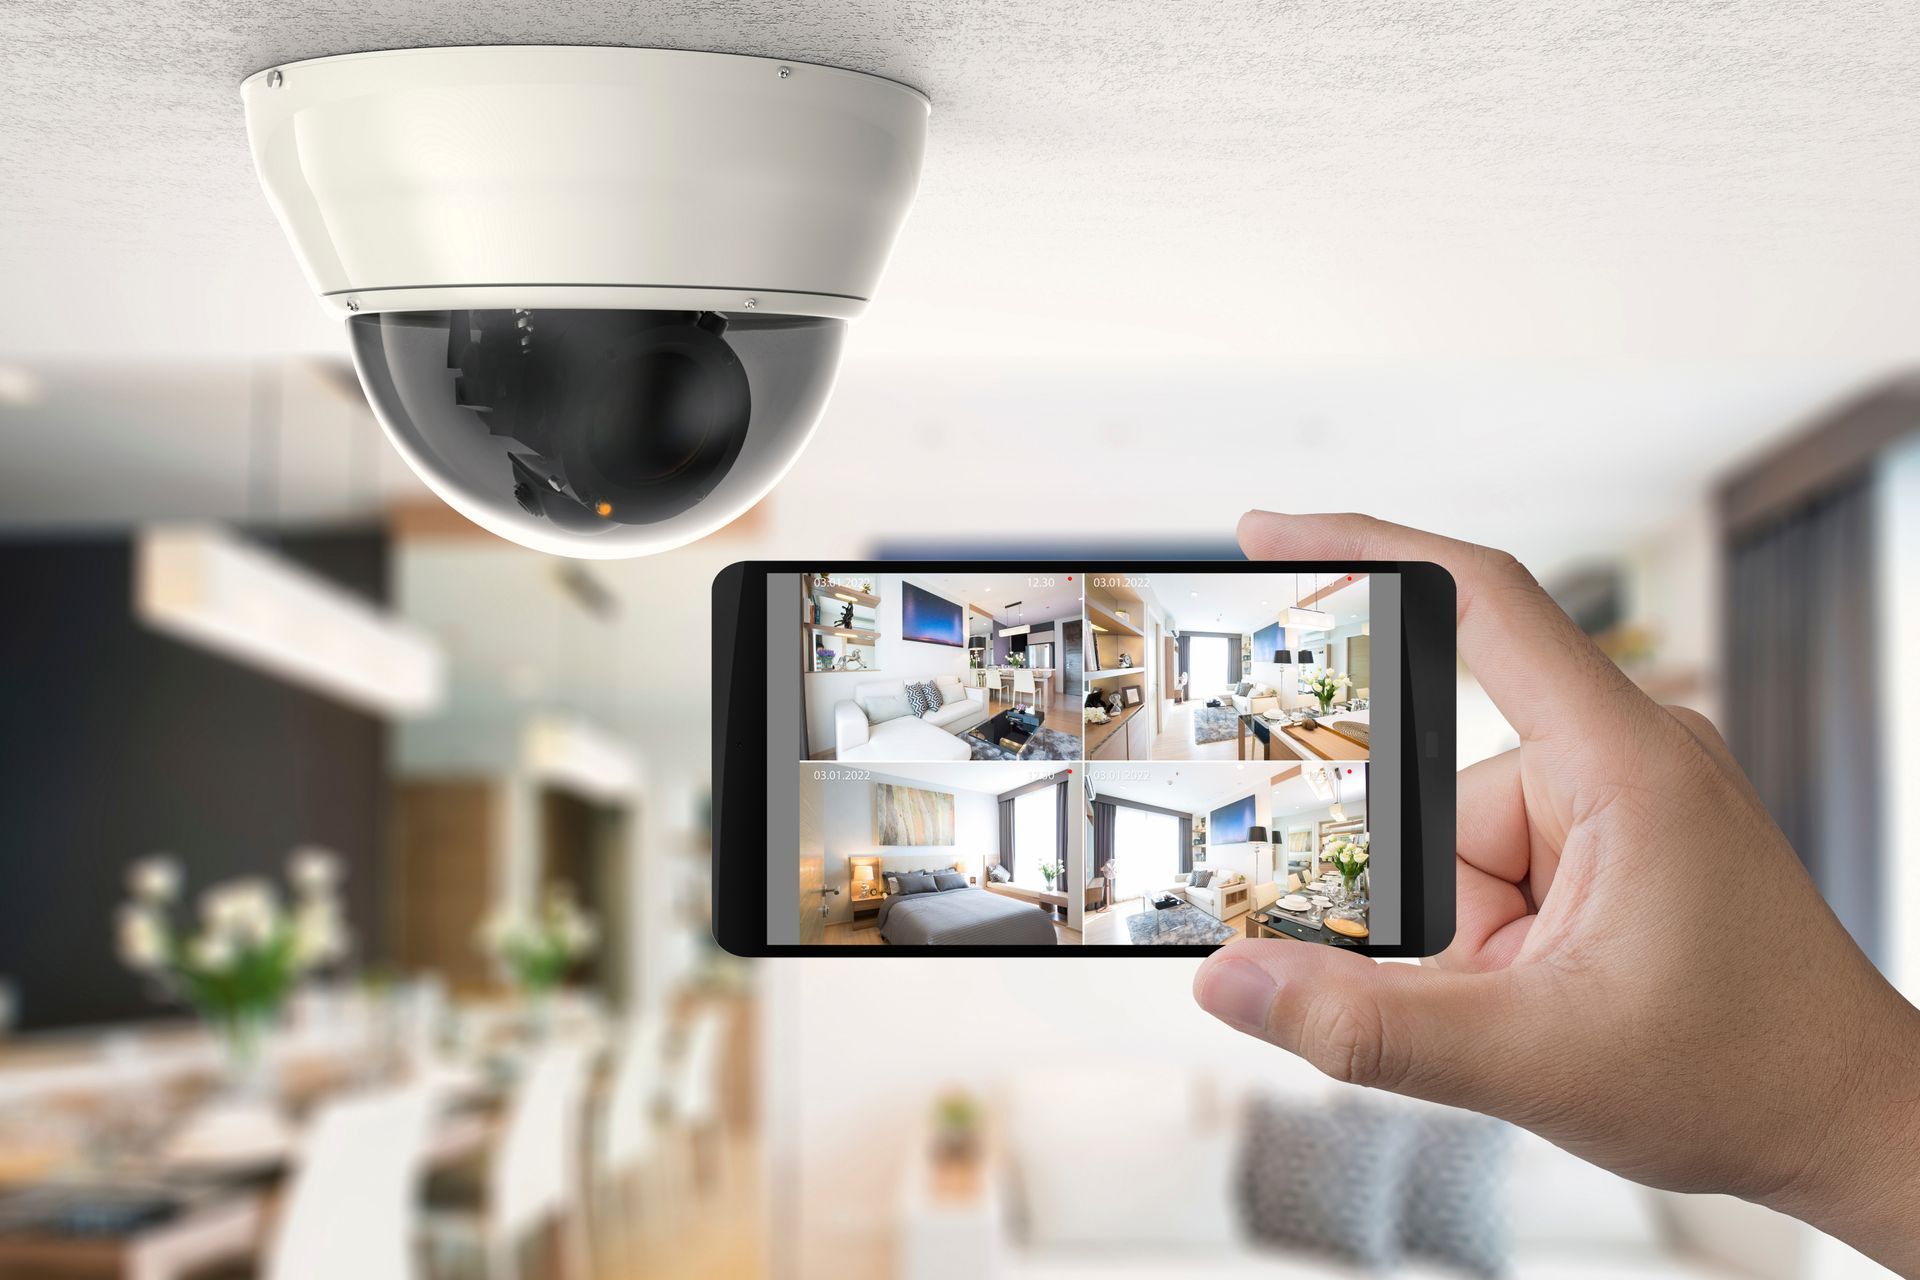 Home Security Safety Upgrades Near You